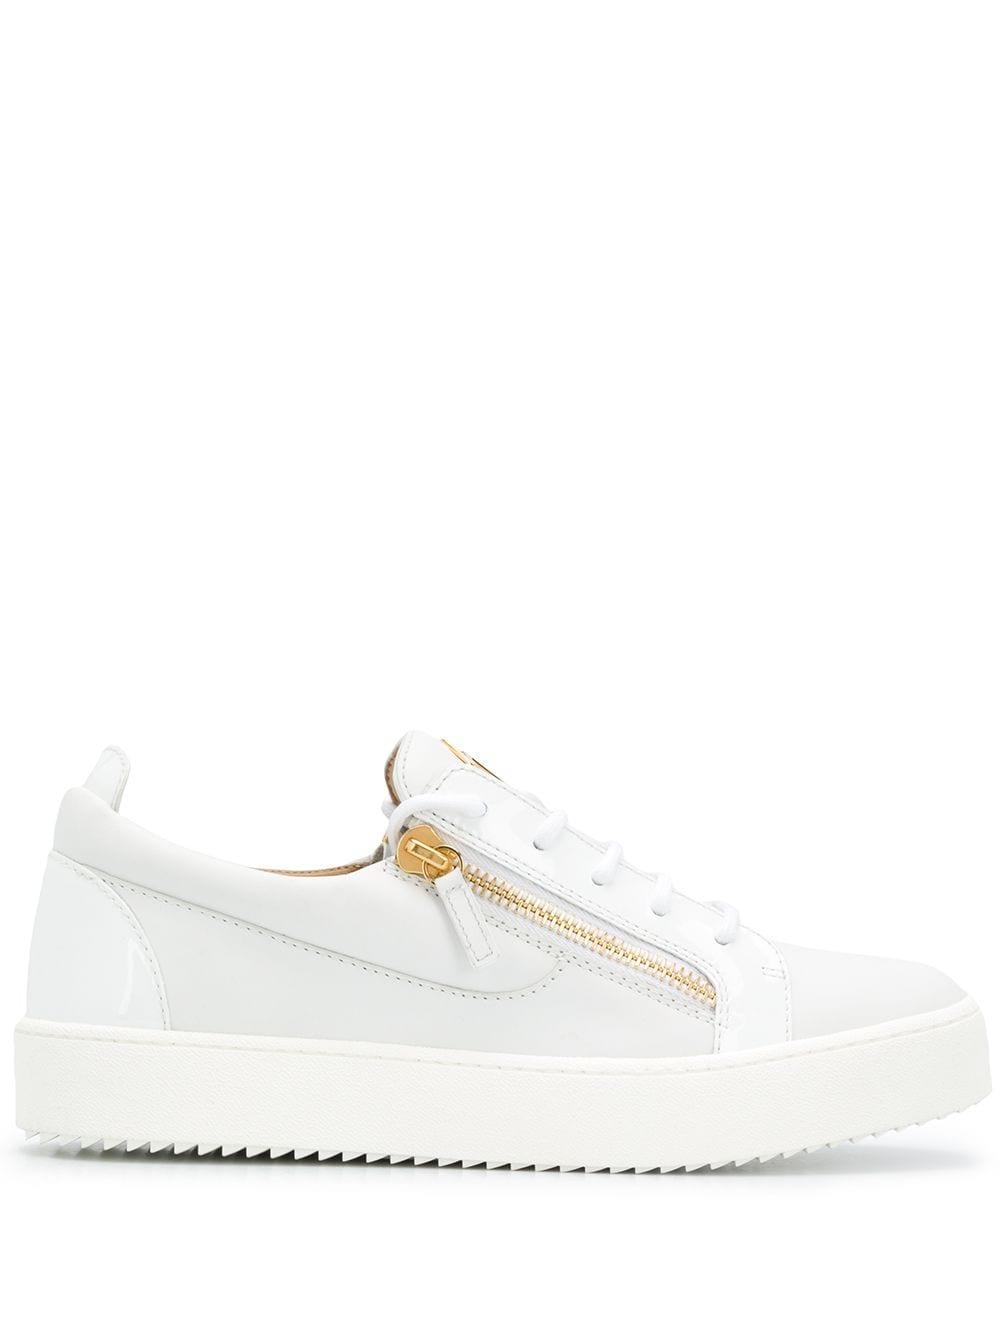 Zanotti Mens White Low-top Leather Trainers for Men - Save 69% - Lyst